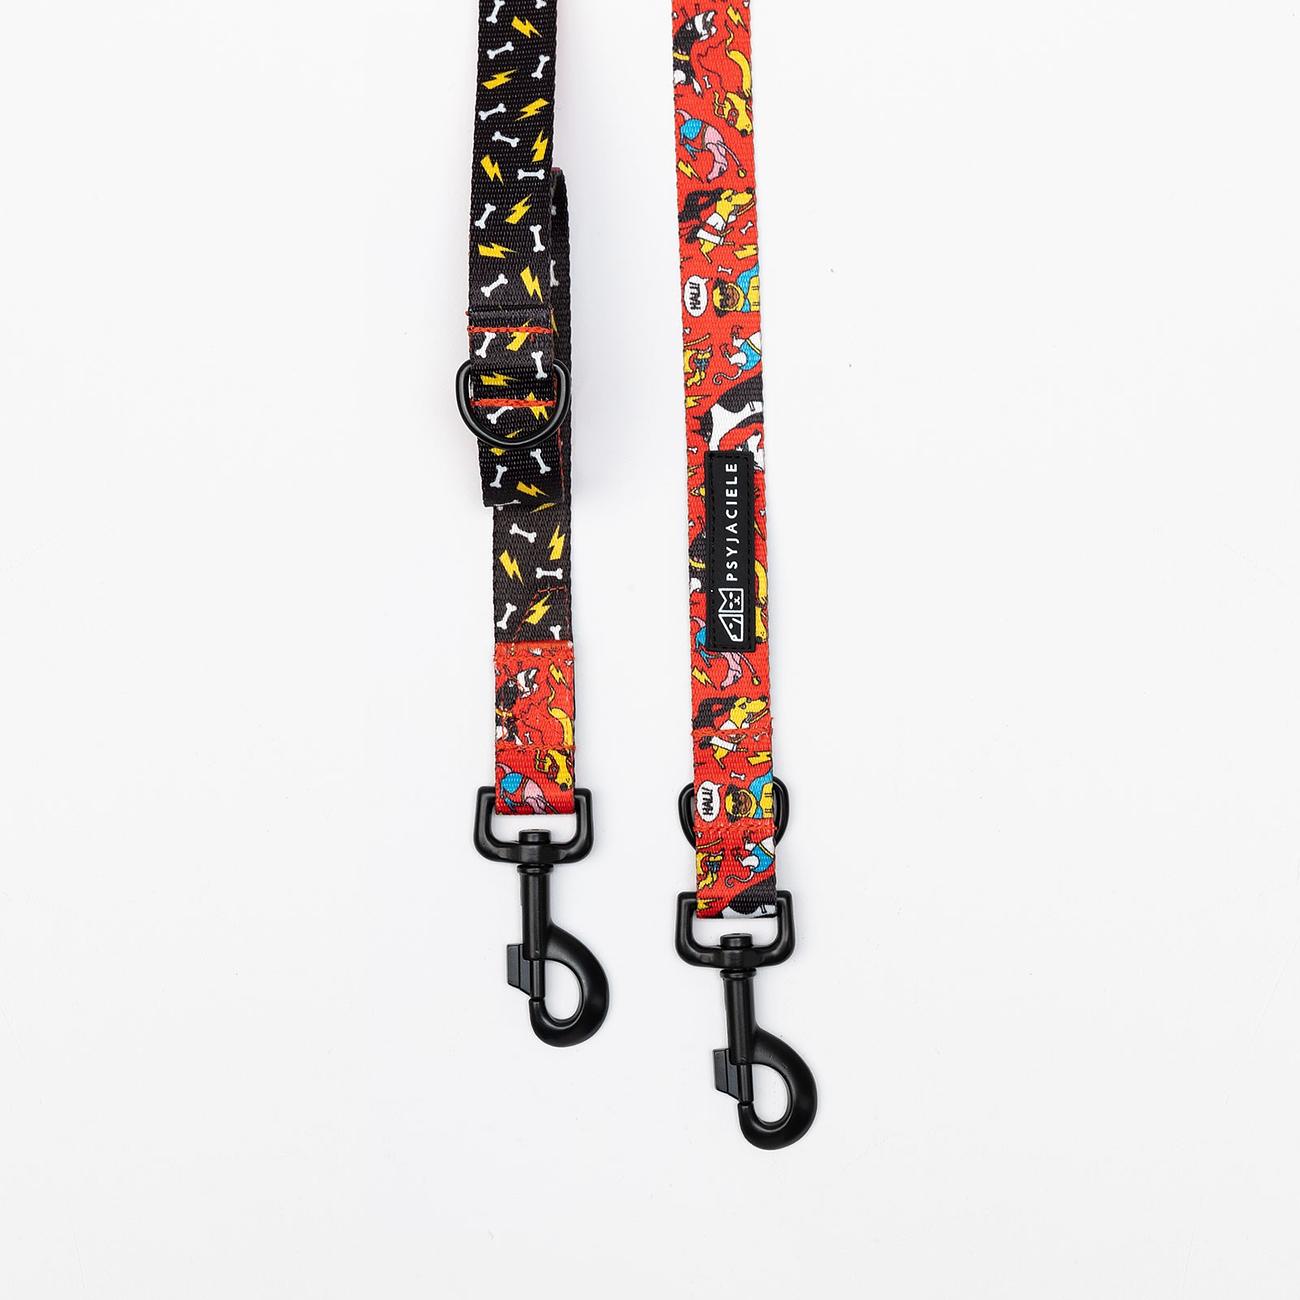 Adjustable leash "Woof for the better world" 